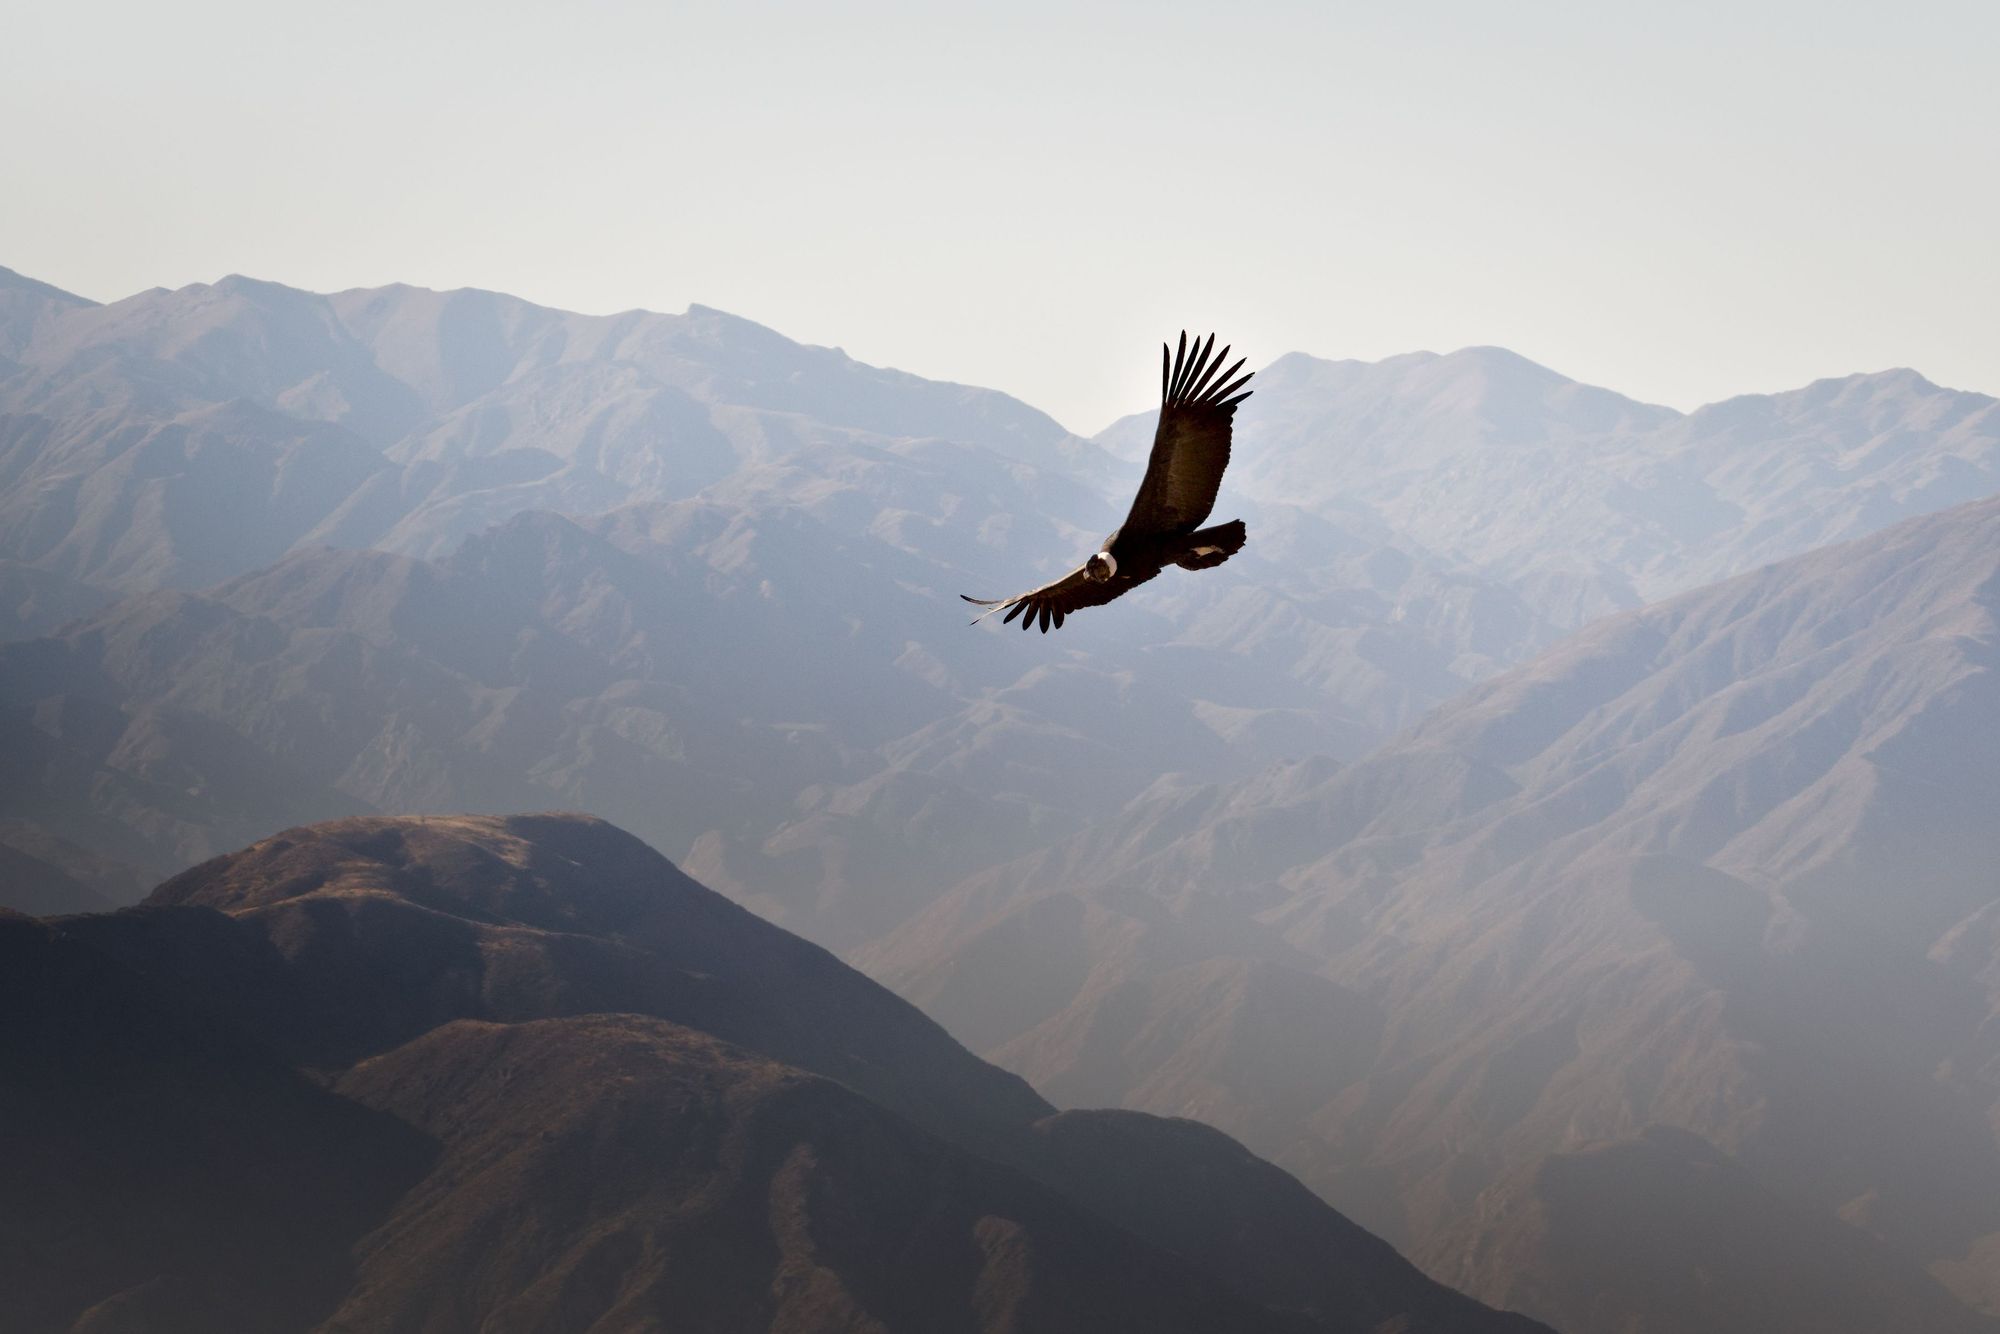 An Andean condor soaring over the Andes montains near Tupungato, province of Mendoza, Argentina. Photo: Getty